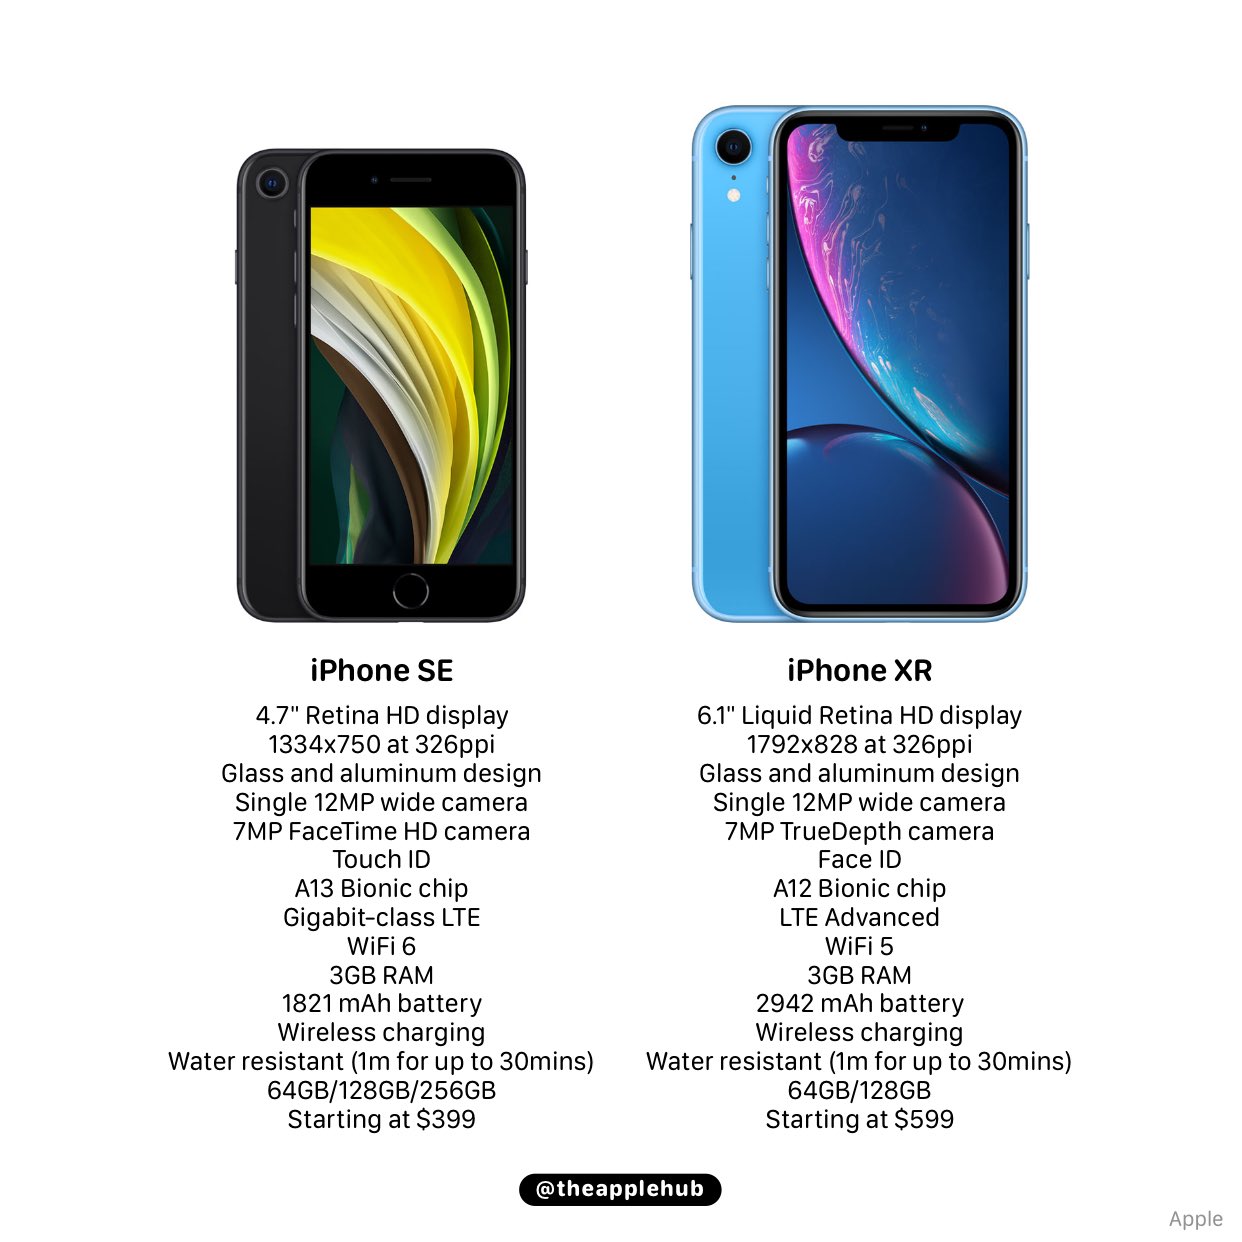 Apple Hub on X: "iPhone SE and iPhone XR comparison. Which one is the  better value? https://t.co/Z7HehvJflf" / X